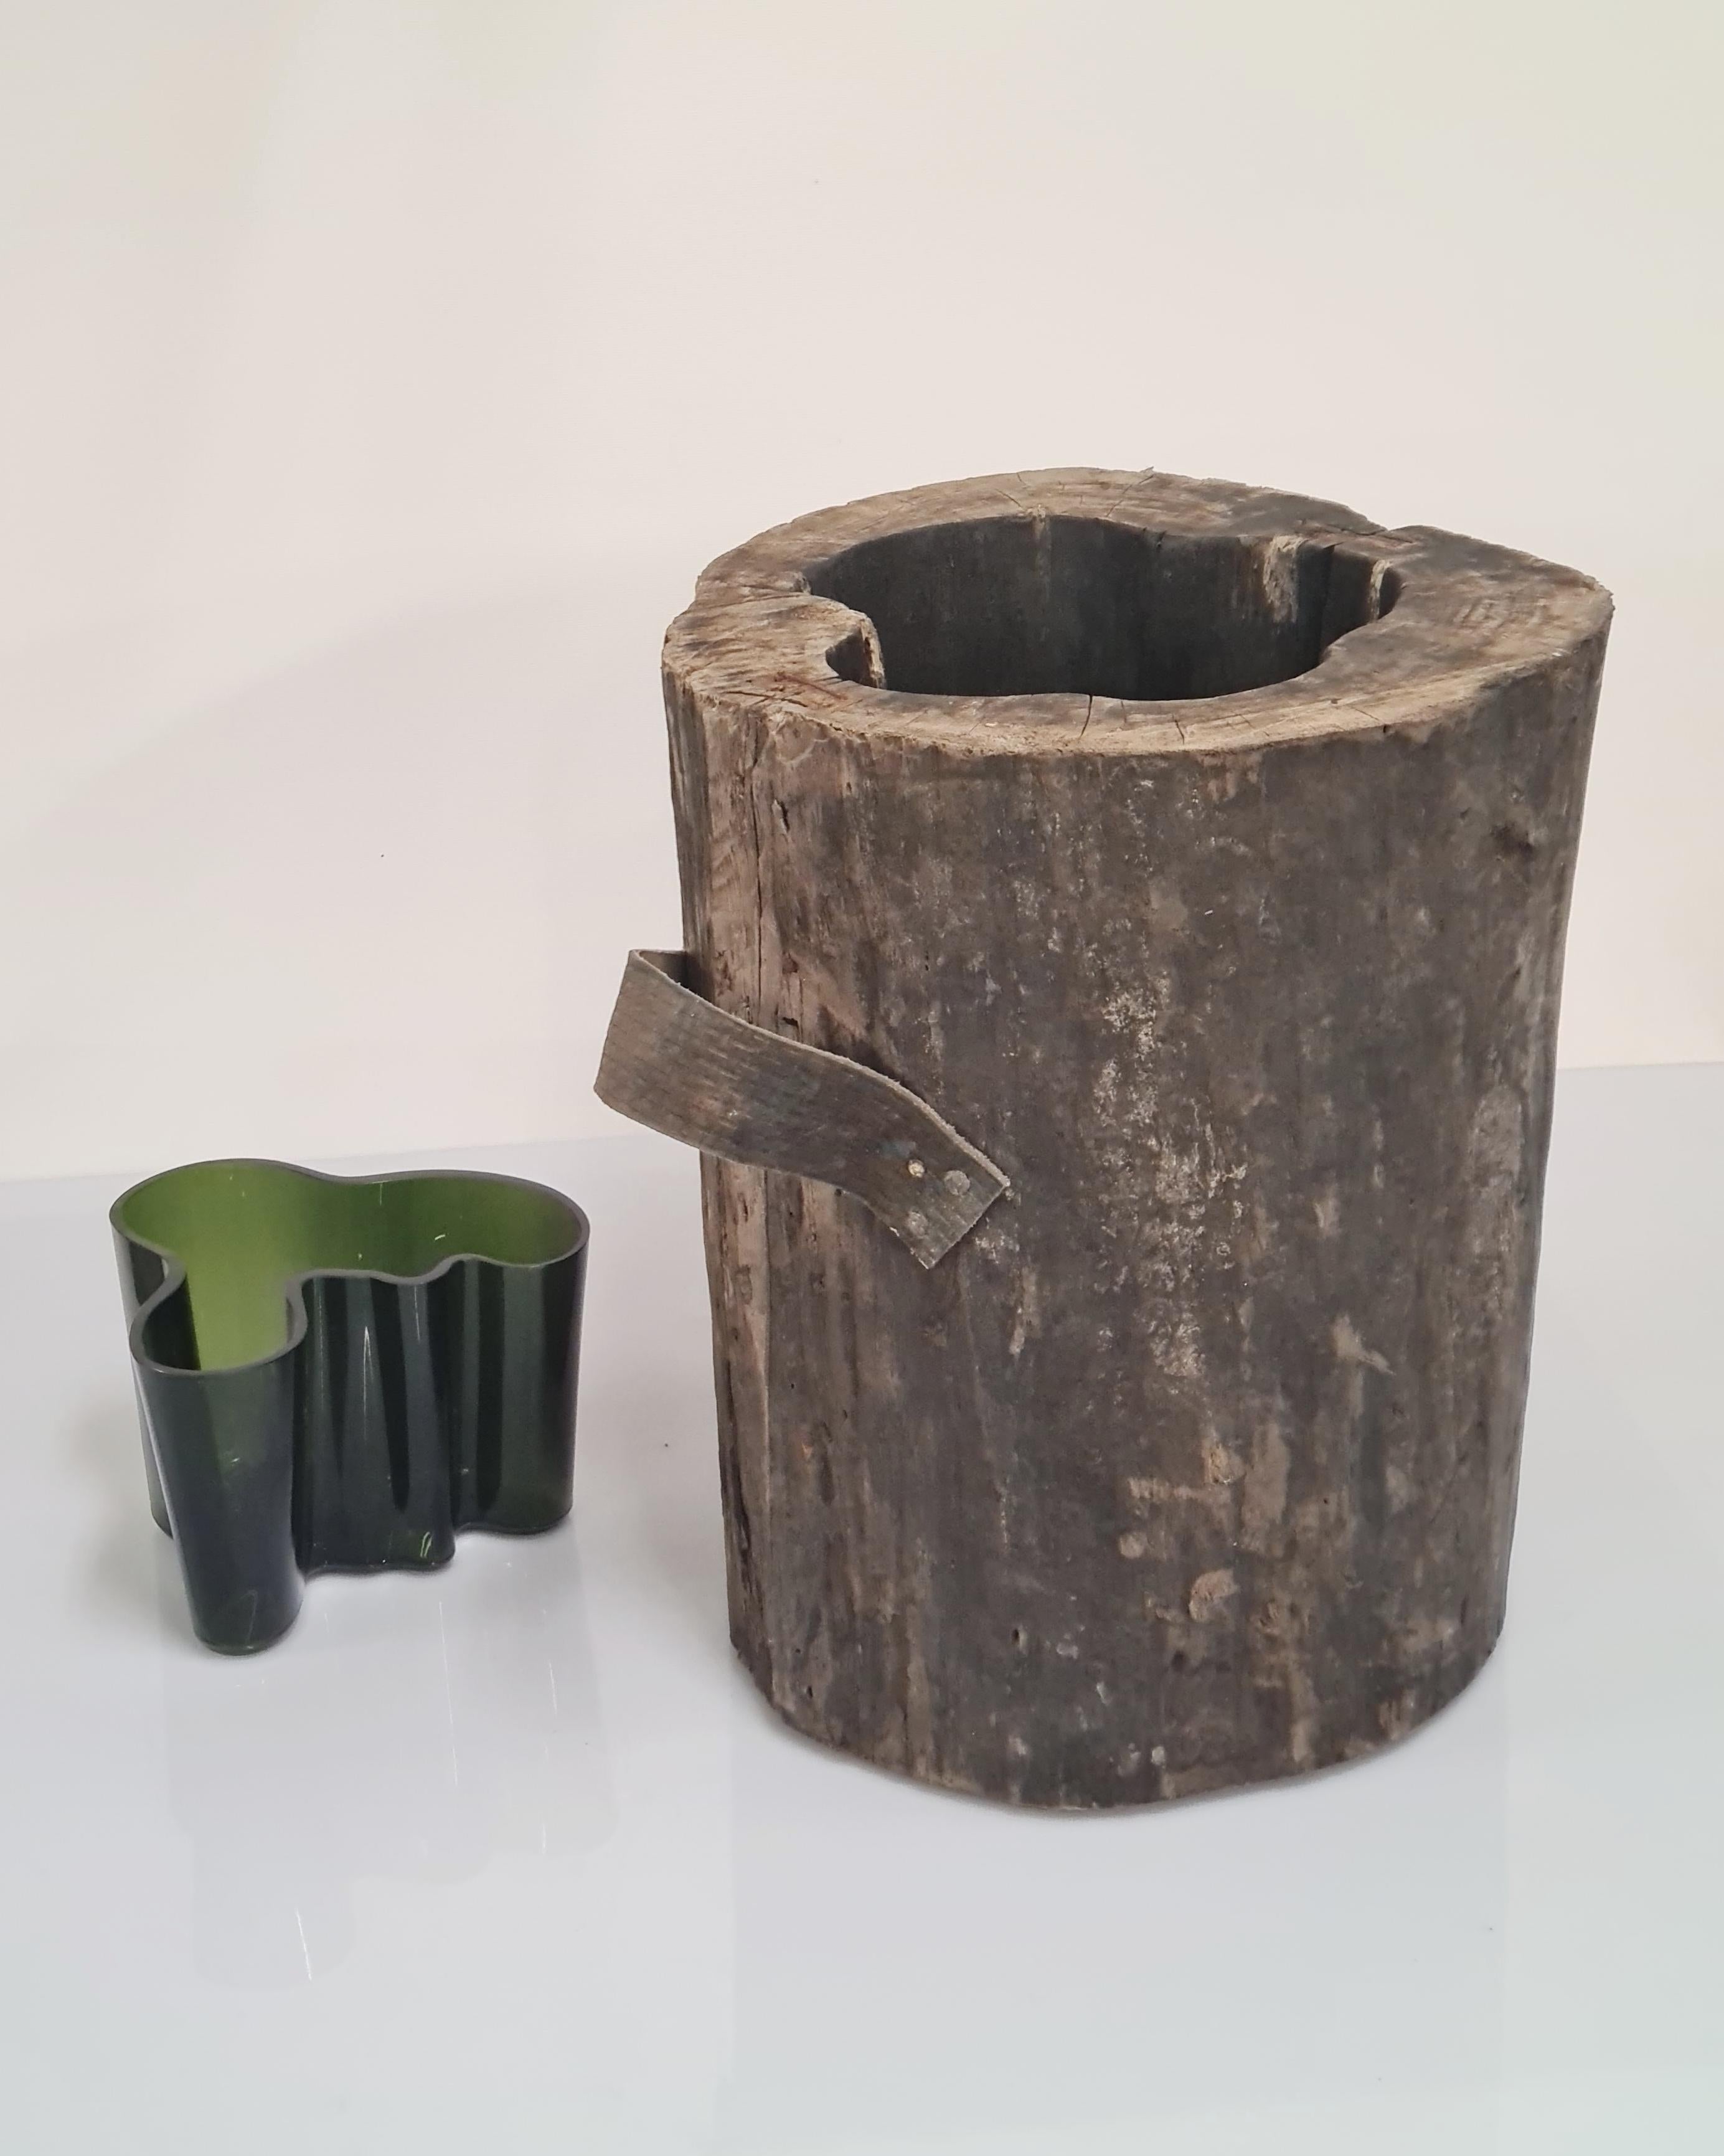 Extremely Rare Alvar Aalto Wooden Mould for Vase Model 3032, 1940s For Sale 3